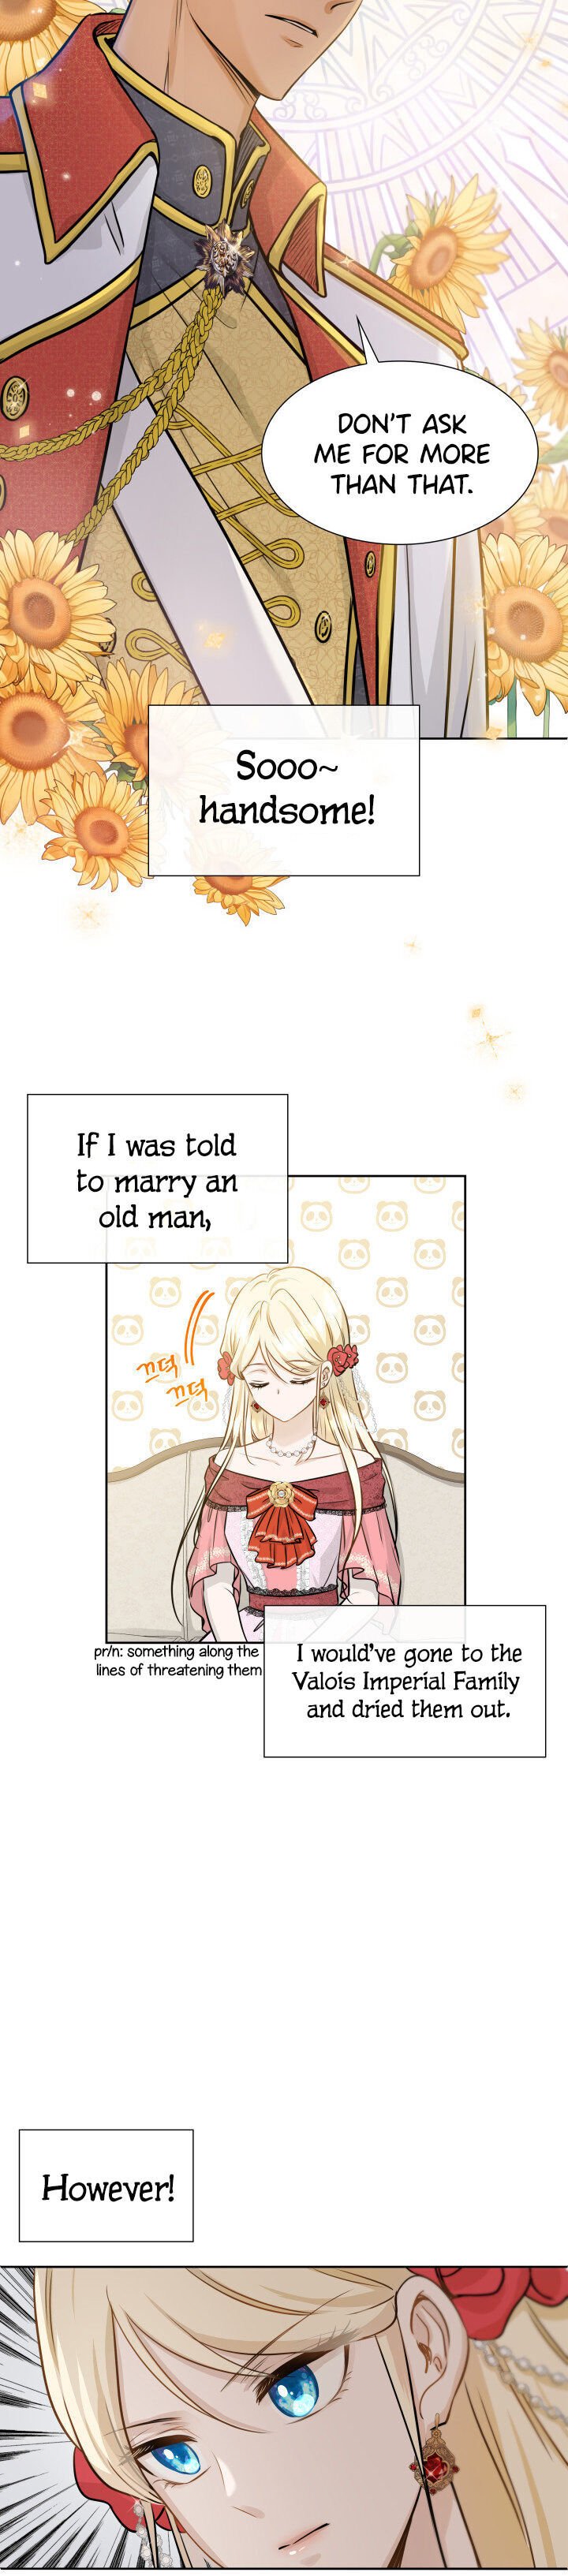 Marriage and Sword chapter 1